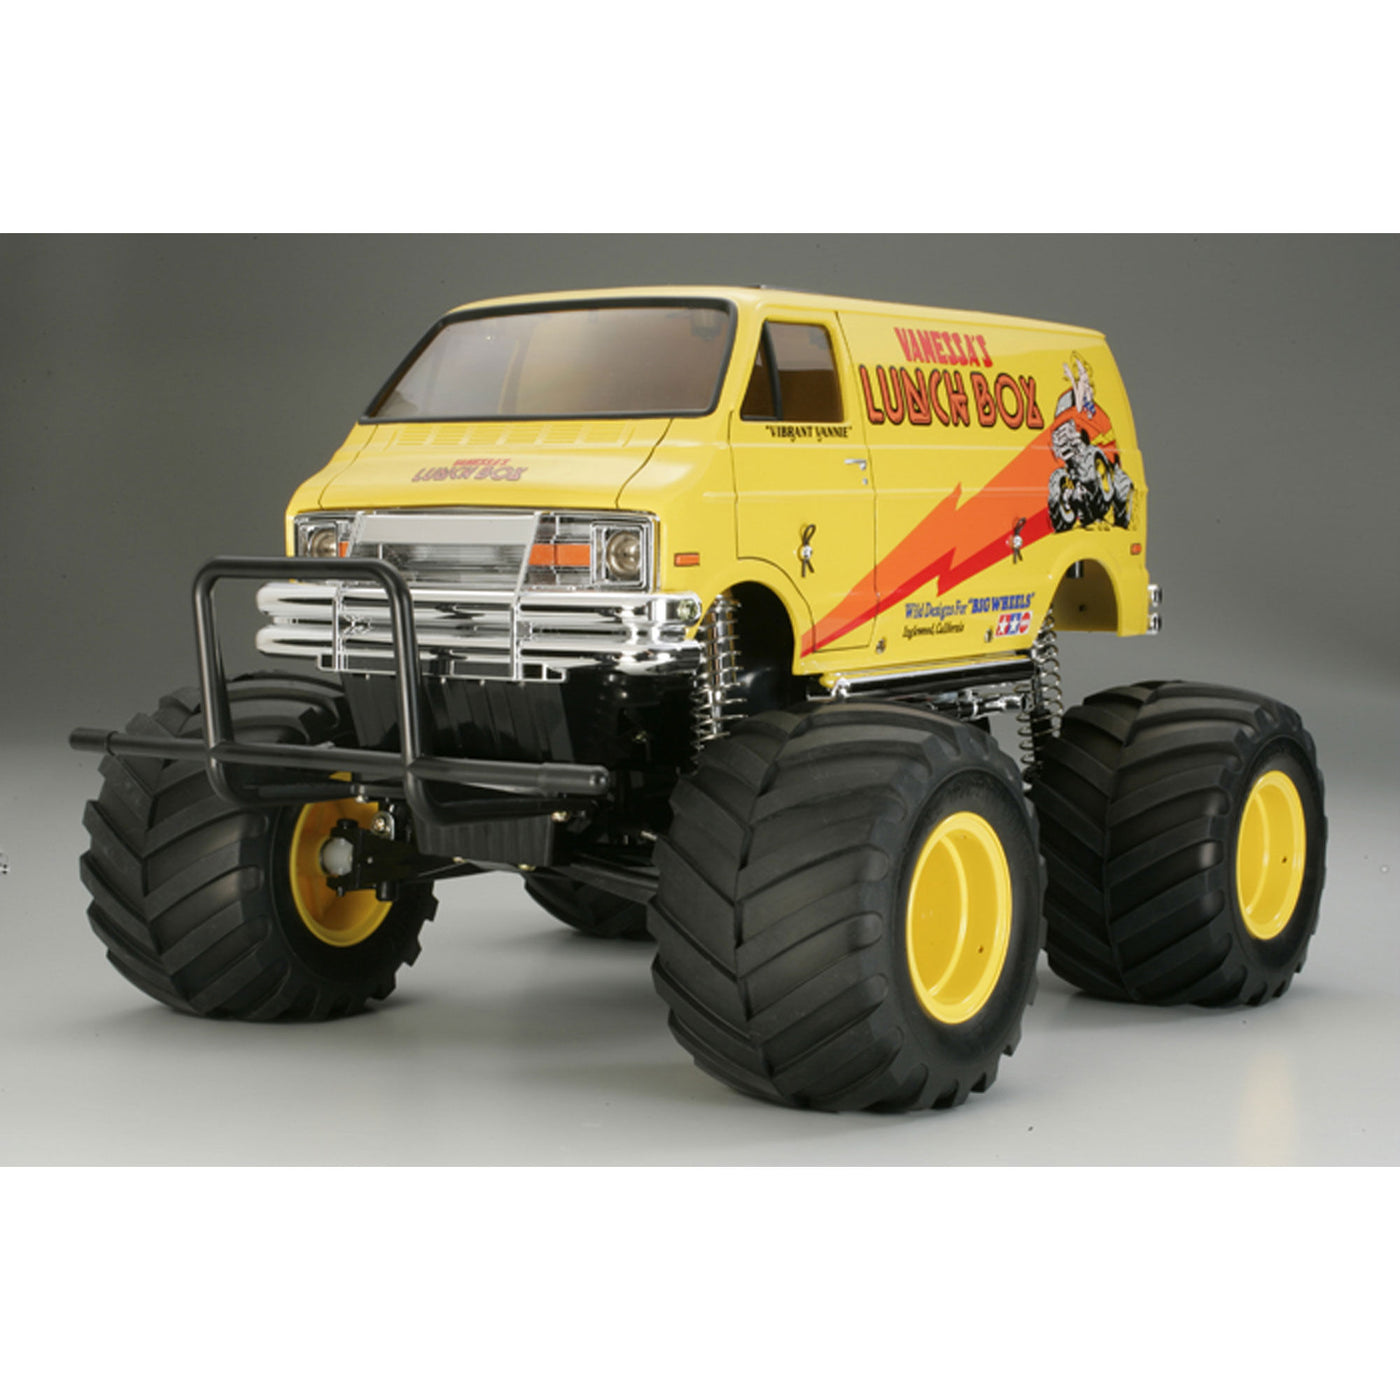 TAM 58347 Lunch Box Kit, 2WD Off Road